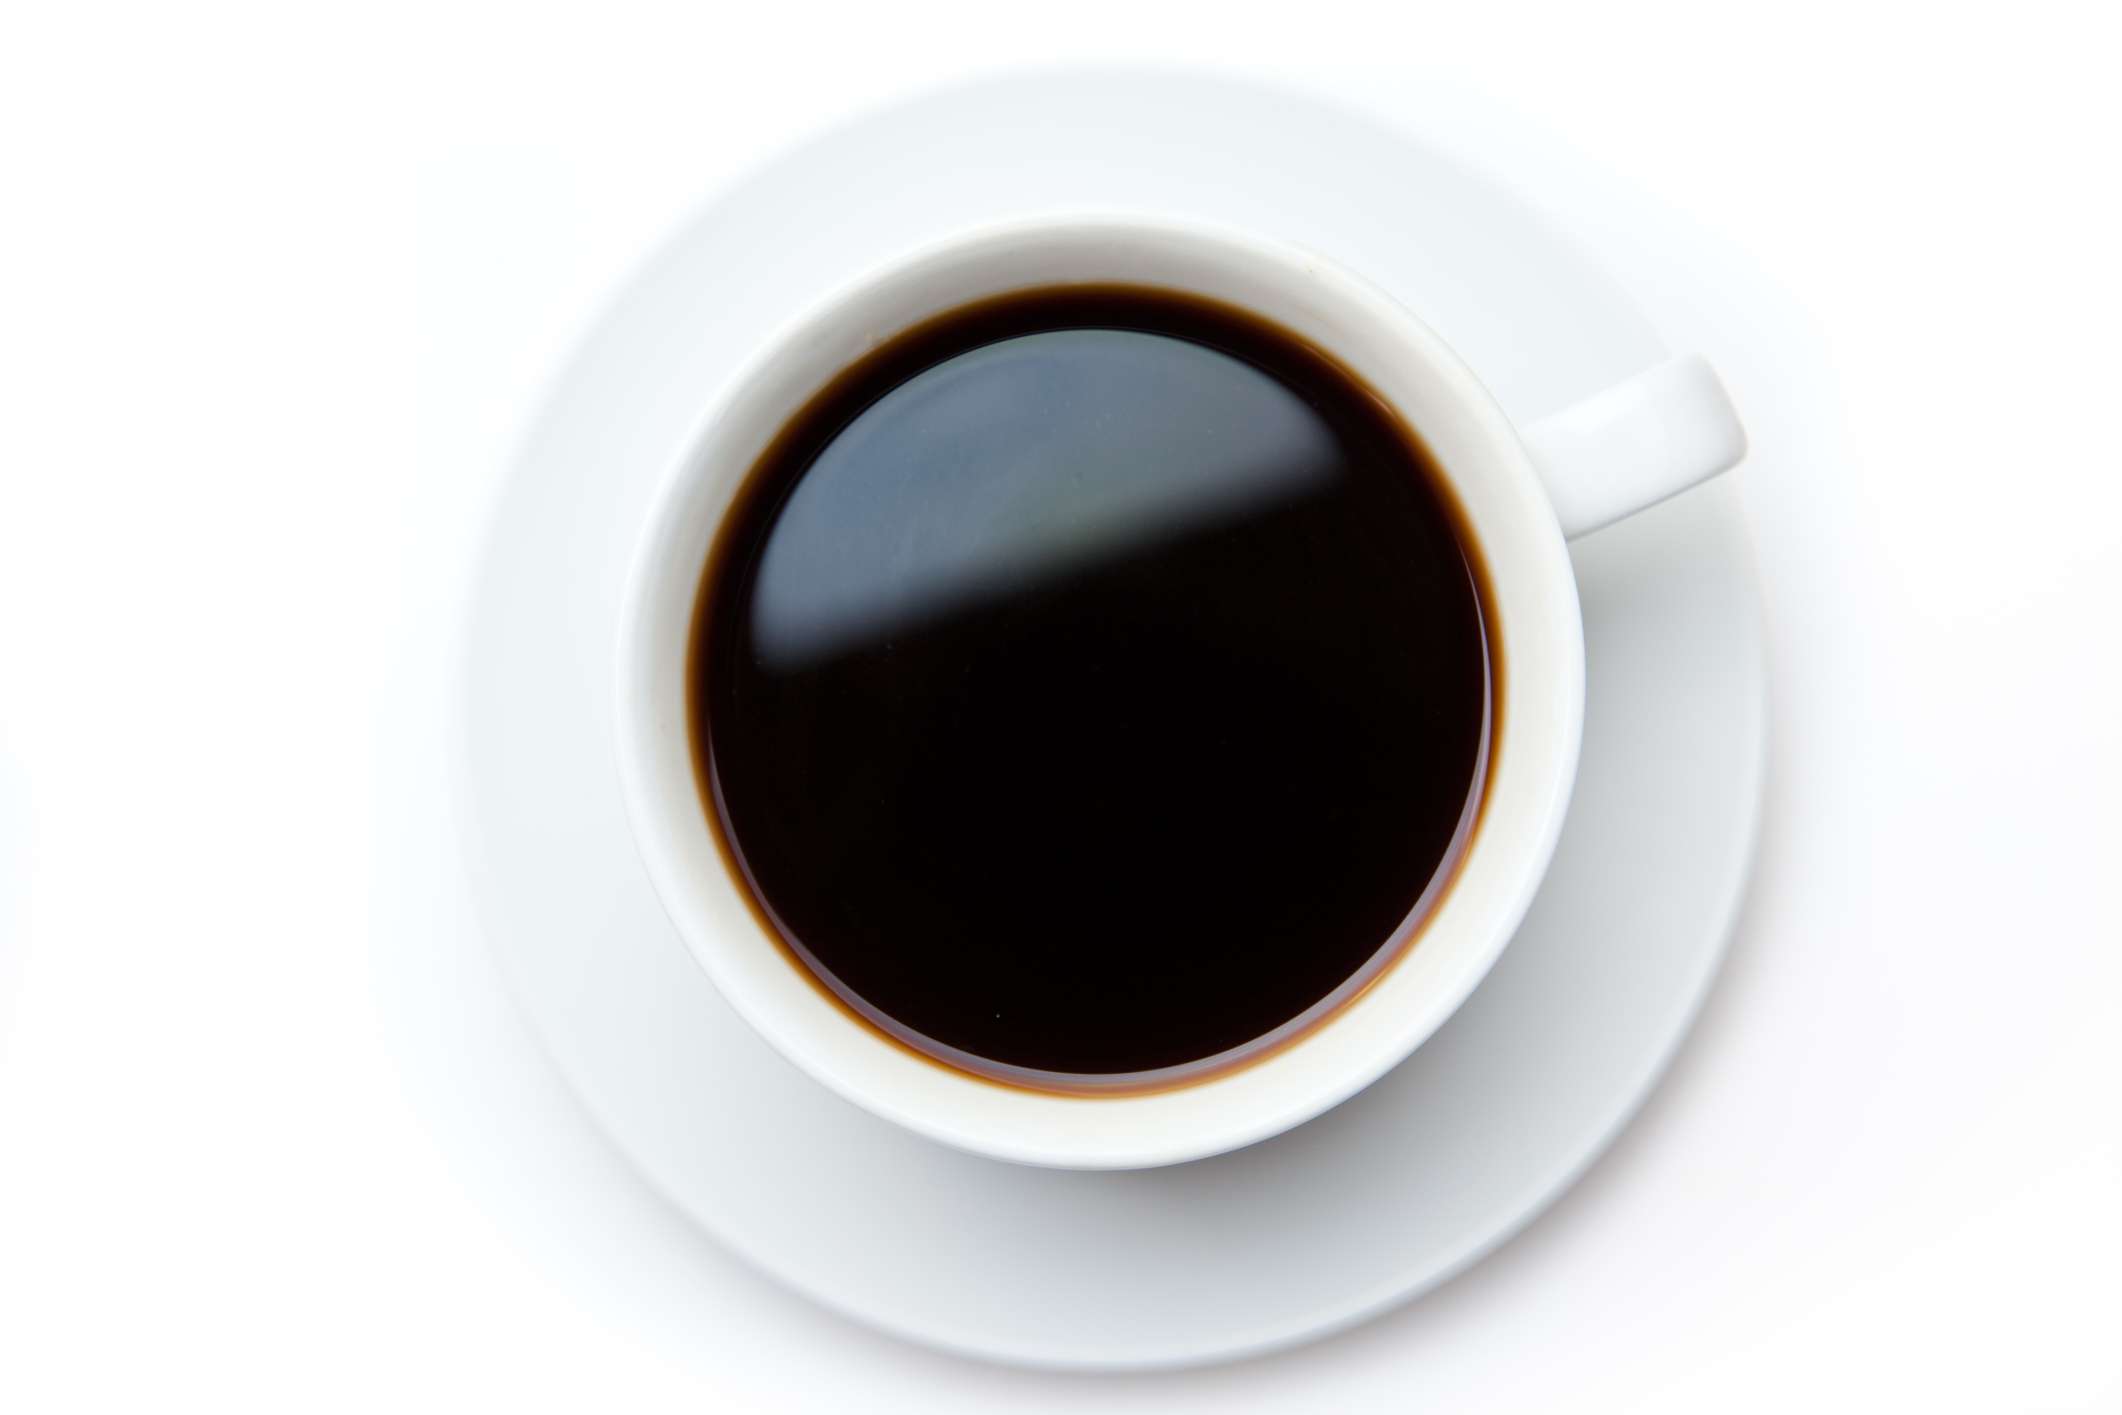 Does Drinking Coffee All Day Damage Your Kidneys?